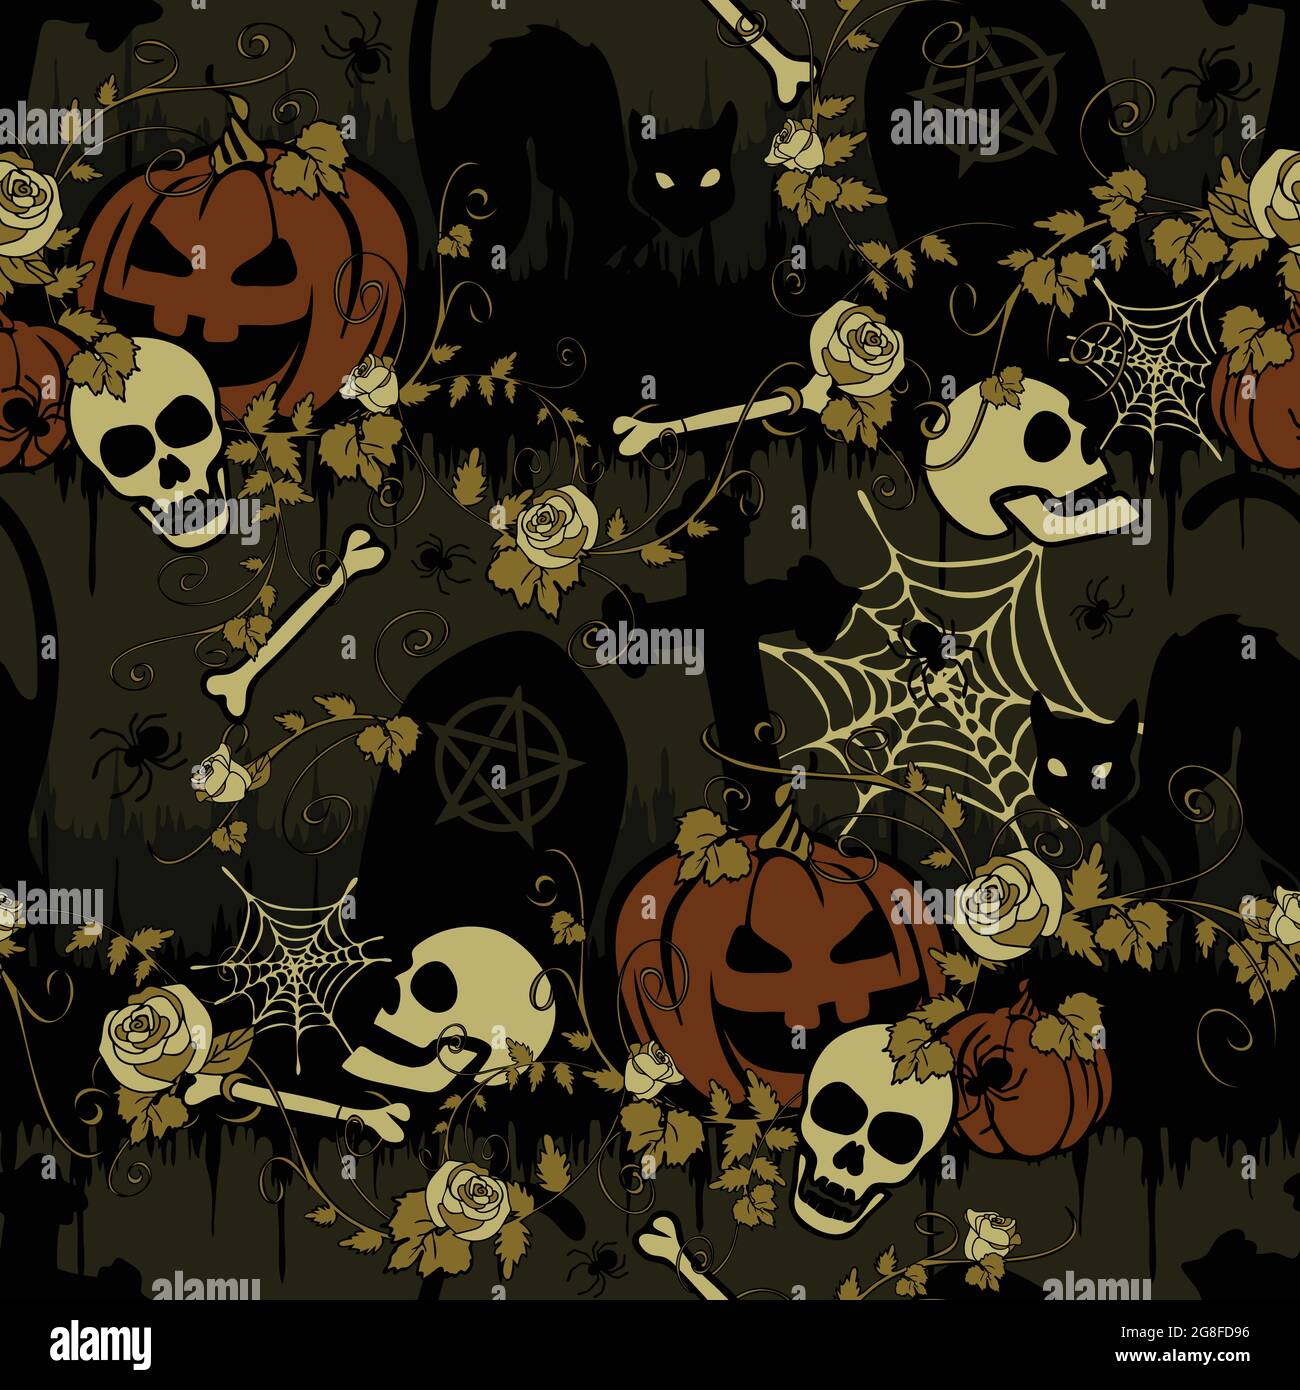 Seamless vector pattern with tombstones and pumpkins silhouette on grey background. Gothic Halloween wallpaper design with black cat. Stock Vector